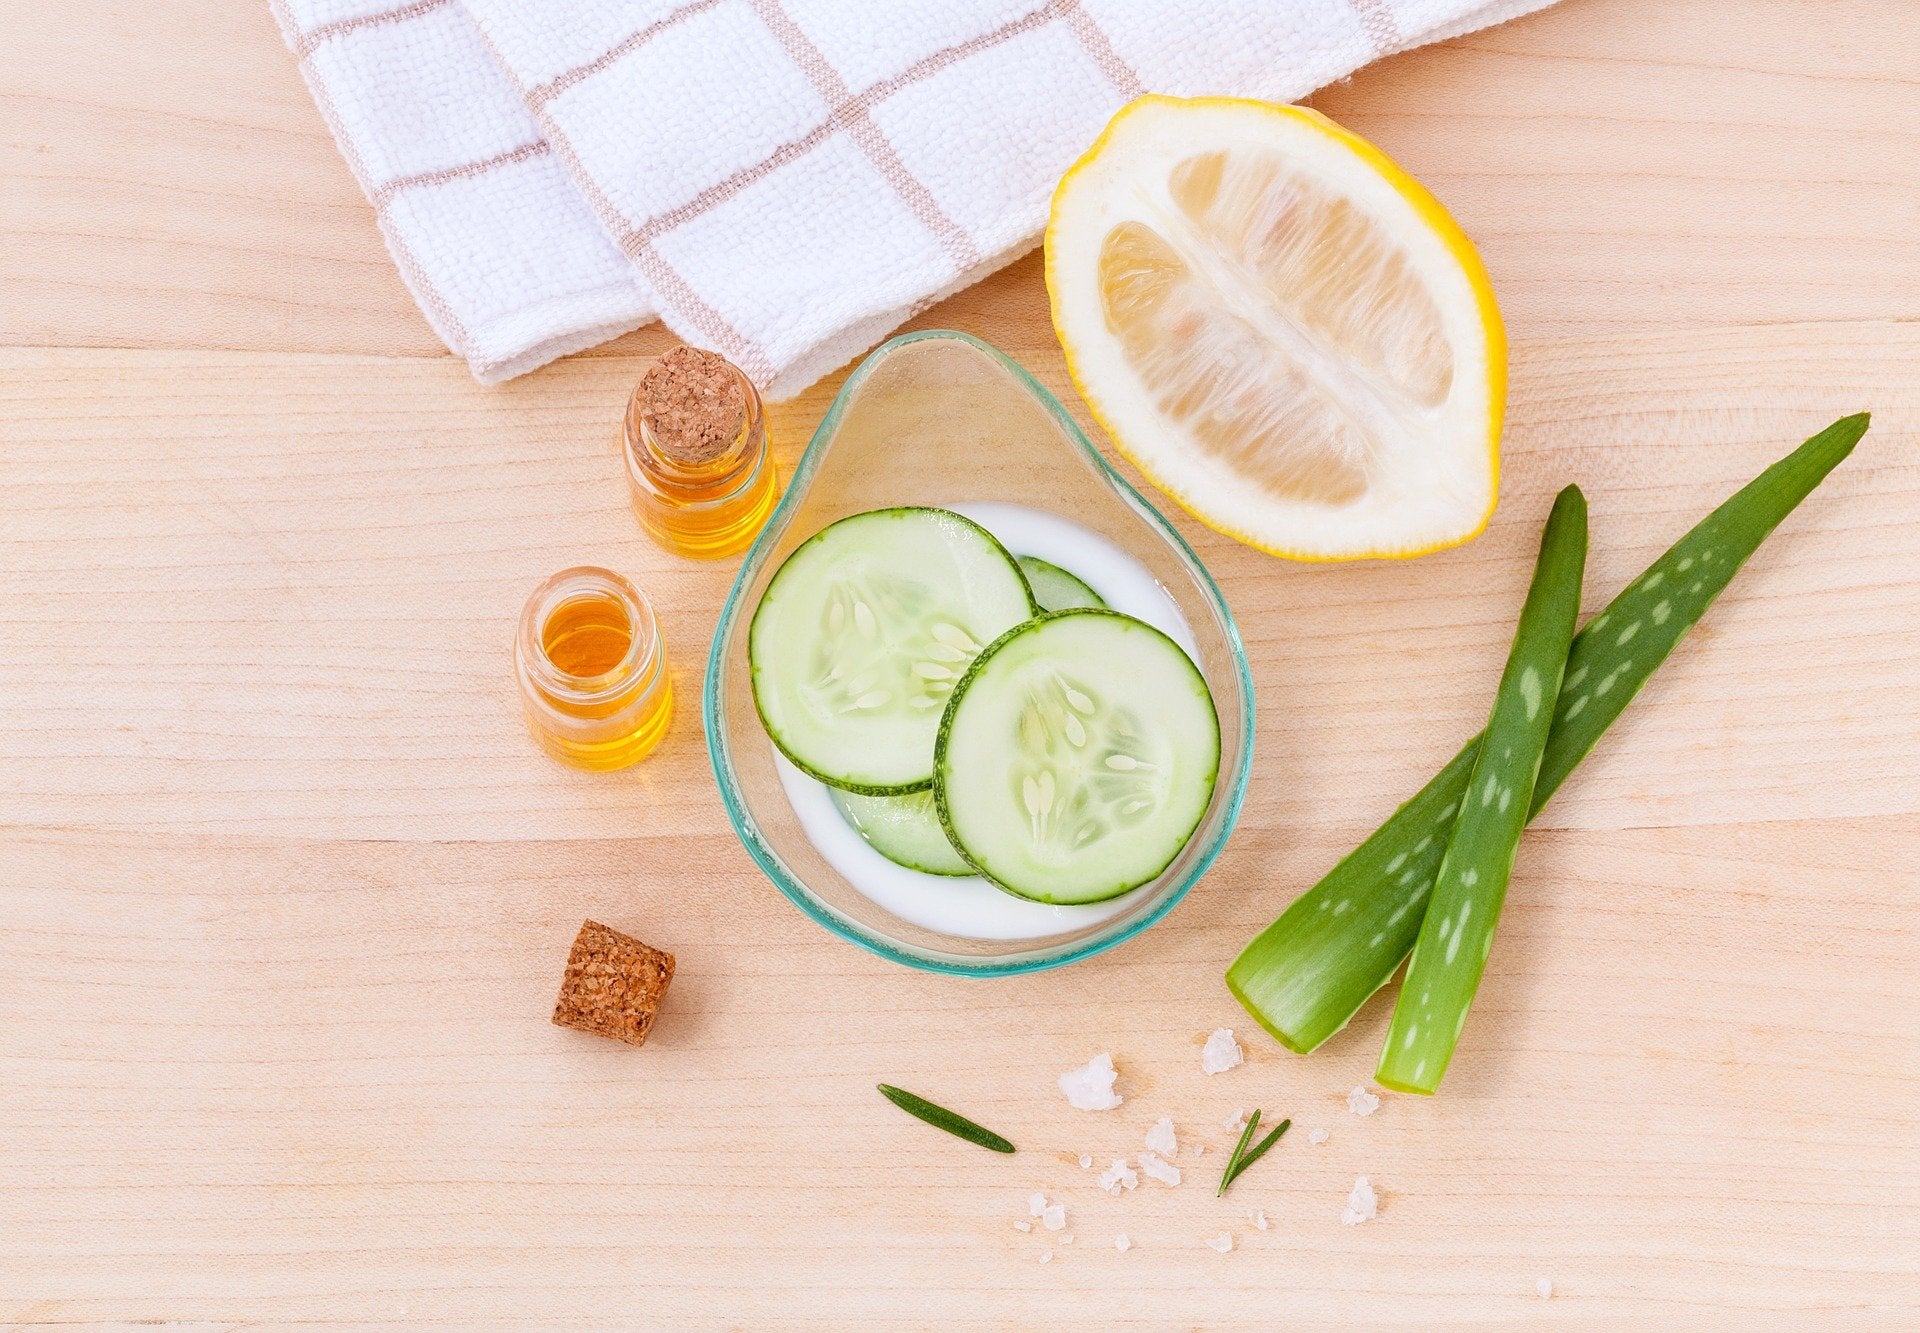 Got Acne? Get Blemish-Free Skin with Inexpensive, Natural Remedies